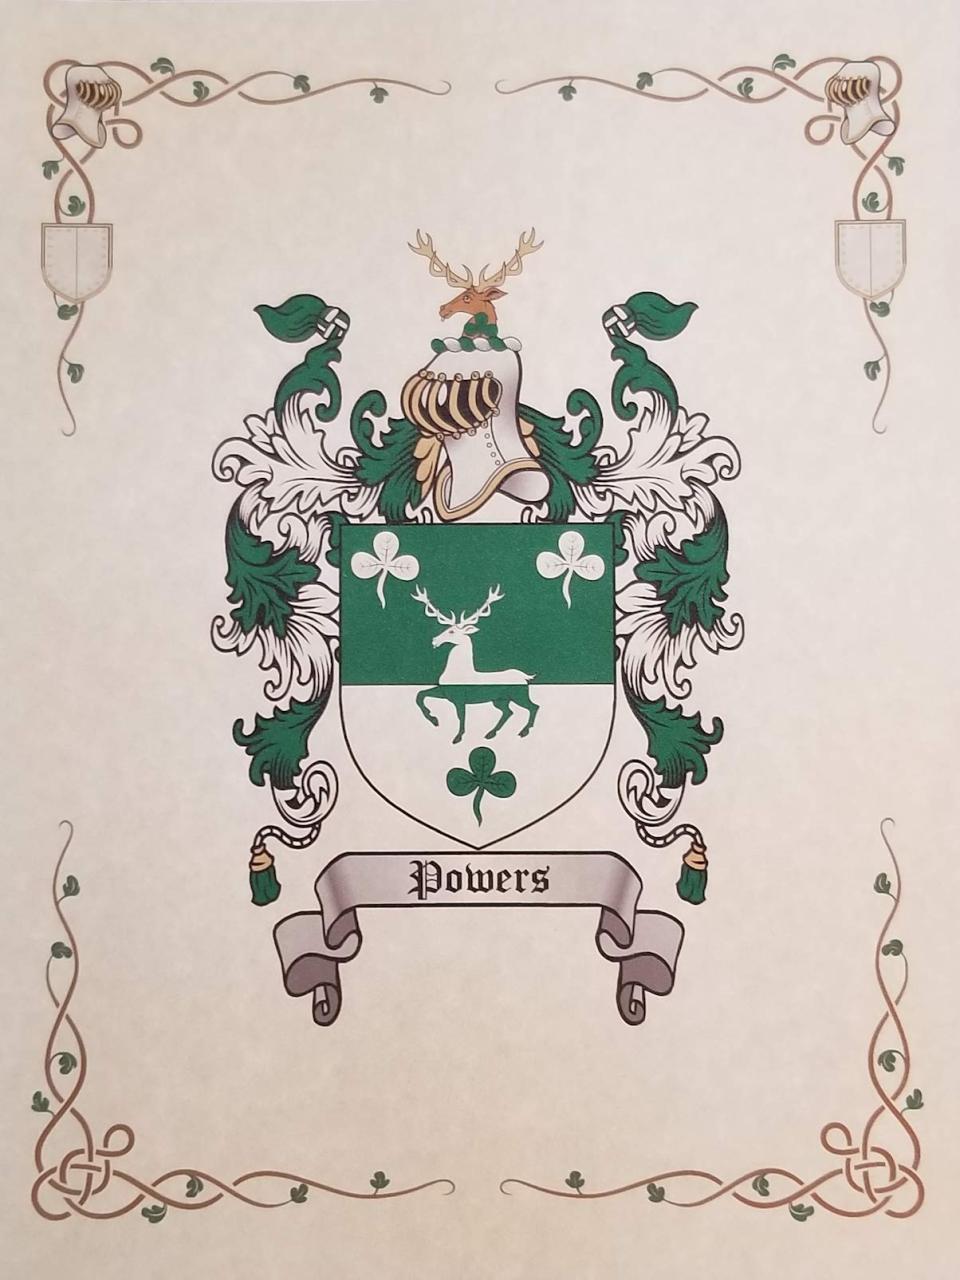 Amazon.Com: Mr Sweets Wessex Coat Of Arms, Family Crest 8.5X11 Print -  Surname Origin: English England: Posters & Prints